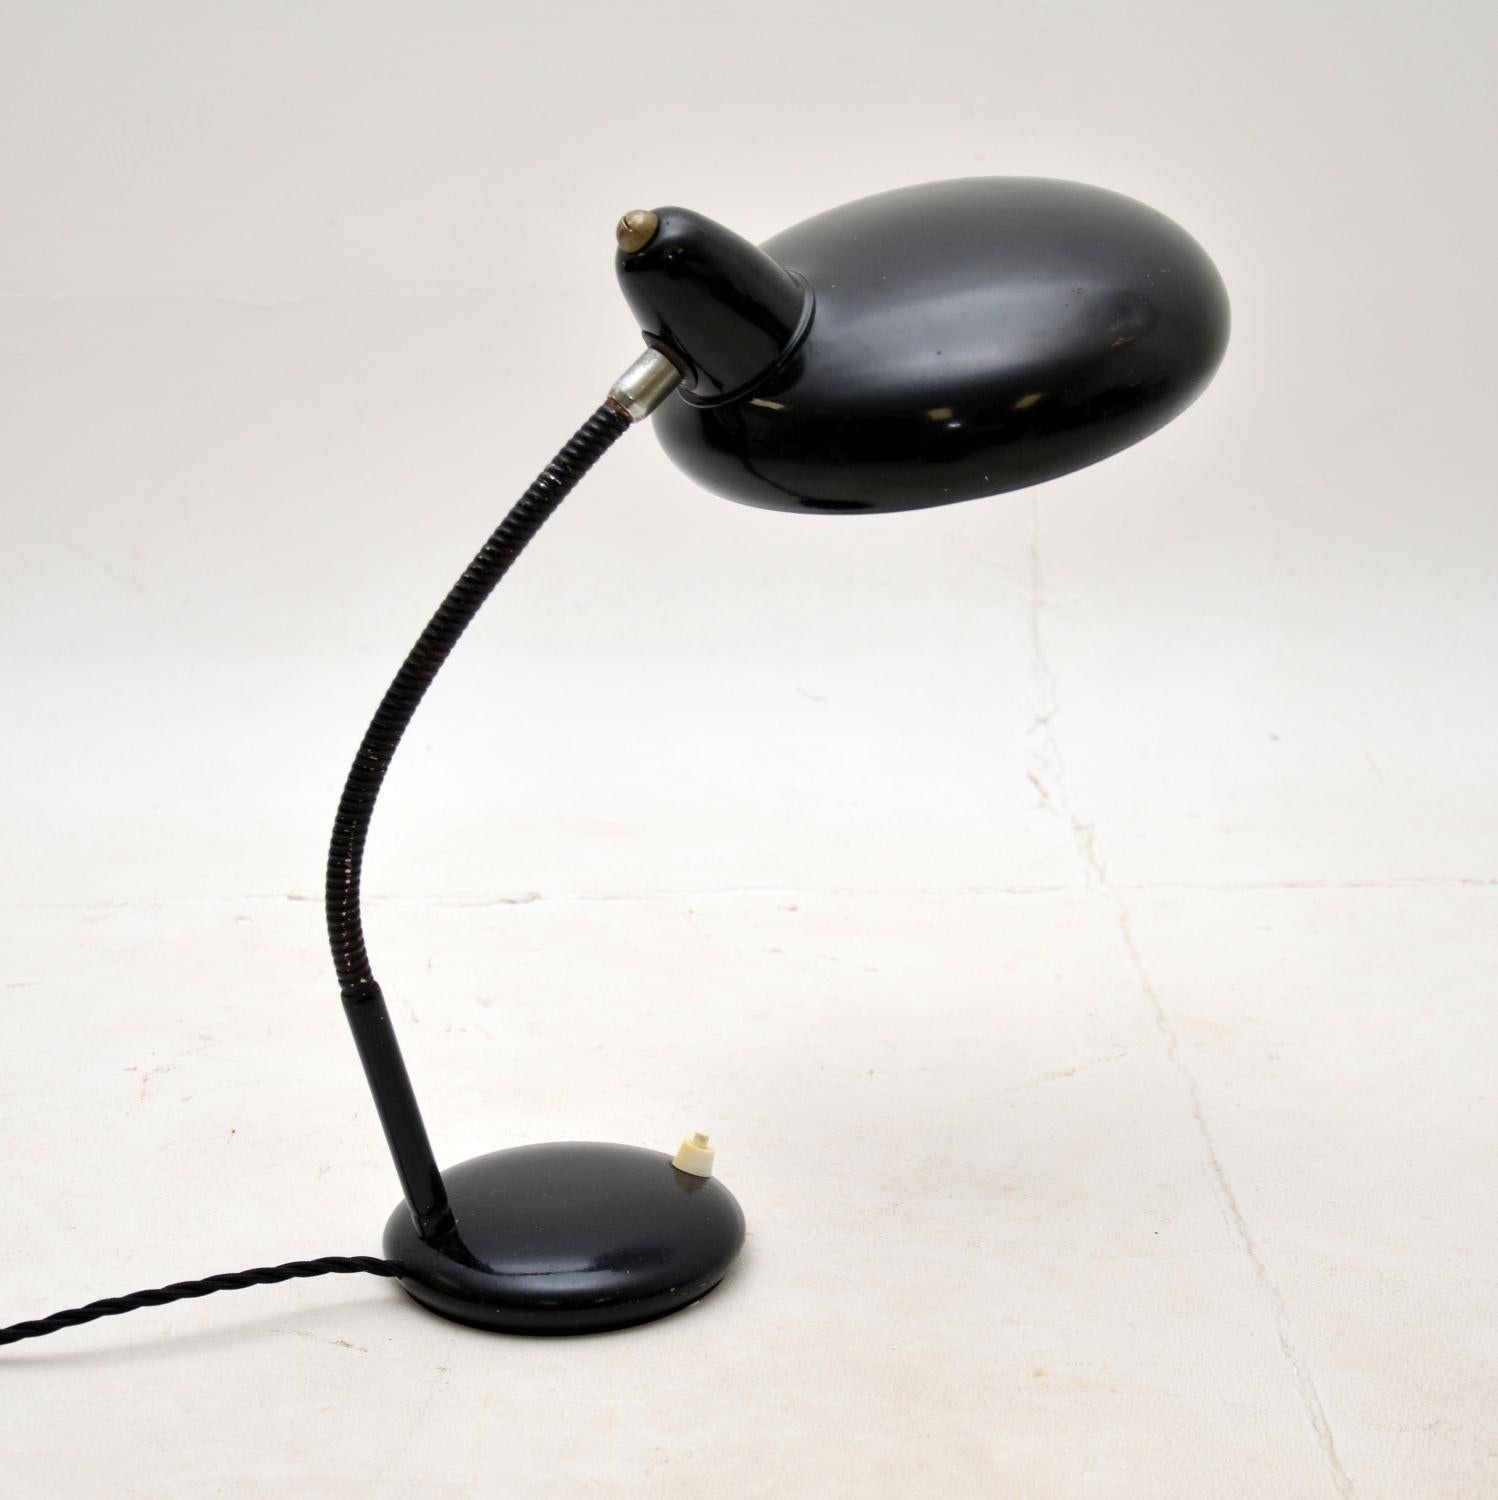 A superb vintage Bauhaus desk lamp, likely to have been made by Escolux in Germany in the 1930’s.

The quality is fantastic, this has a gorgeous design and is a lovely, practical size.

The condition is excellent for its age, with just some minor